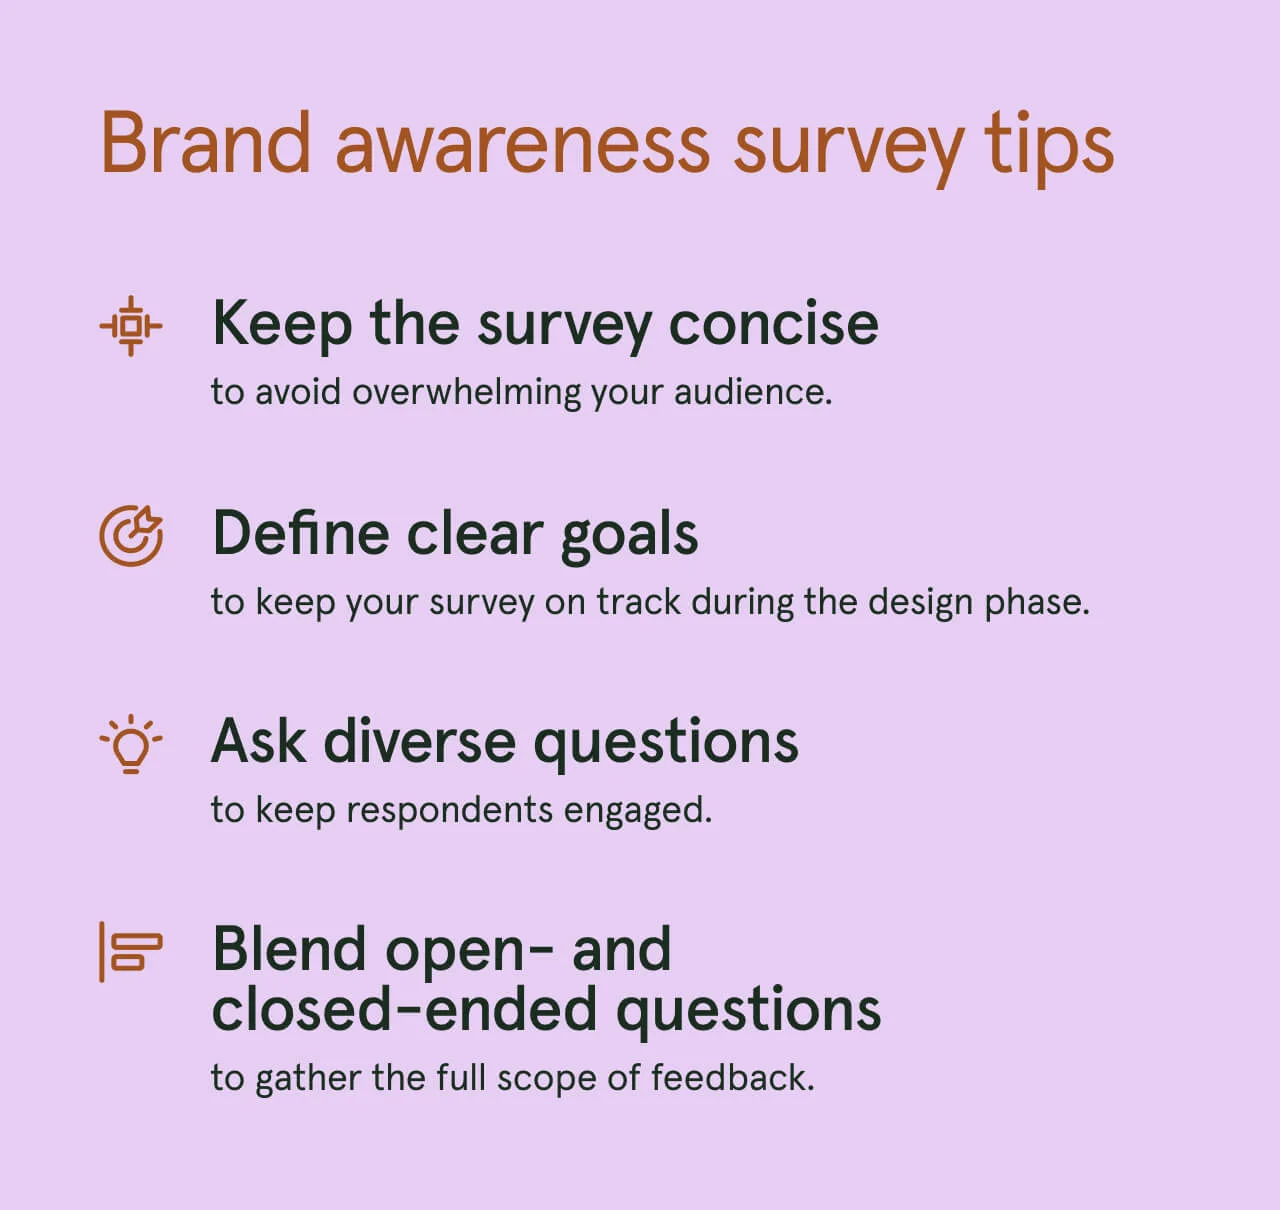 Our brand awareness survey tips are to keep it concise, define clear goals, ask diverse questions, and blend open- and close-ended questions.